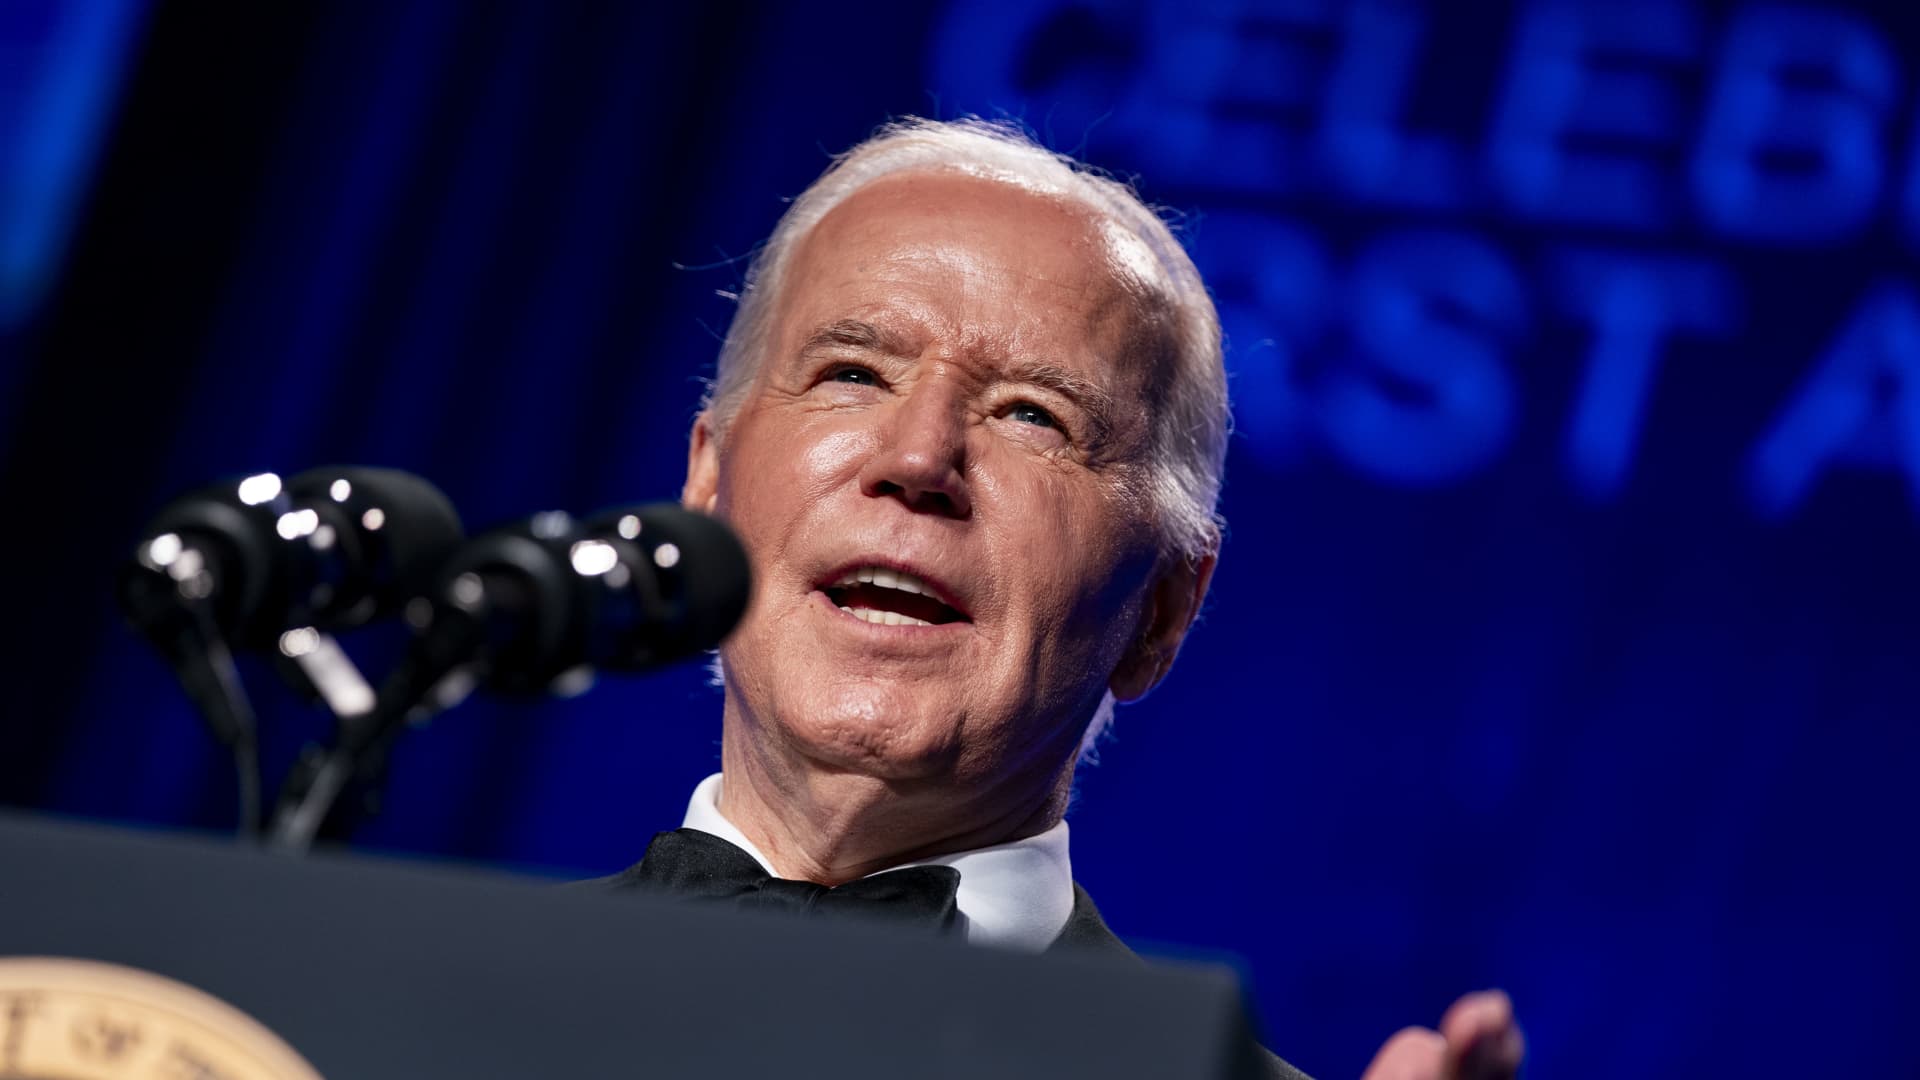 Biden swipes at Trump at White Property correspondents’ evening meal